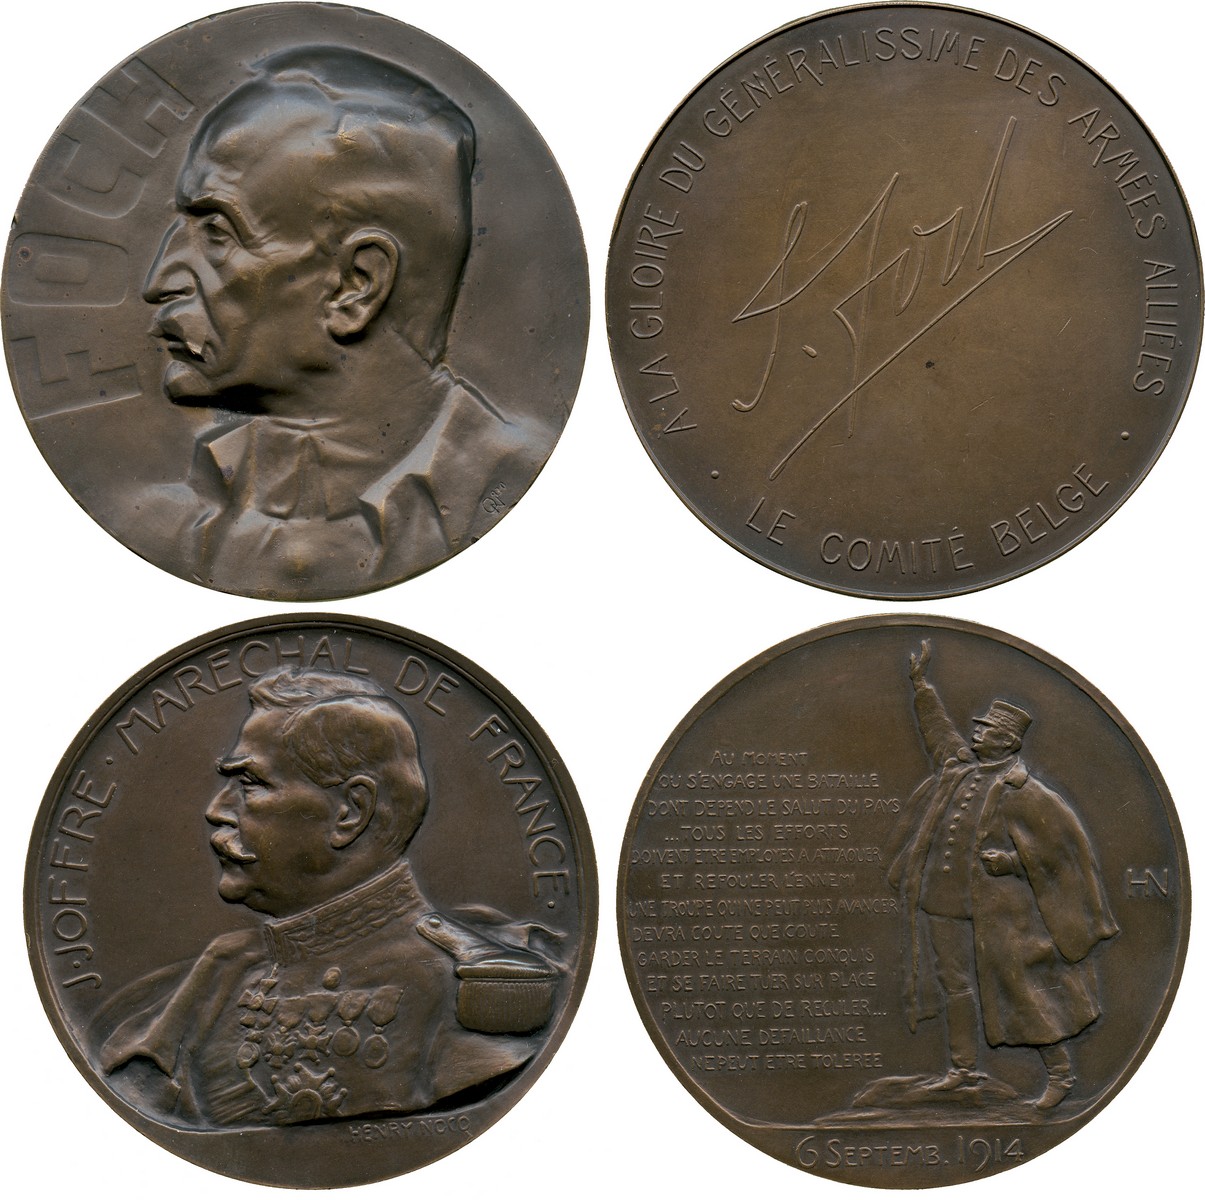 COMMEMORATIVE MEDALS, WORLD MEDALS, Medals of the First World War, Medals of the Allies, France,